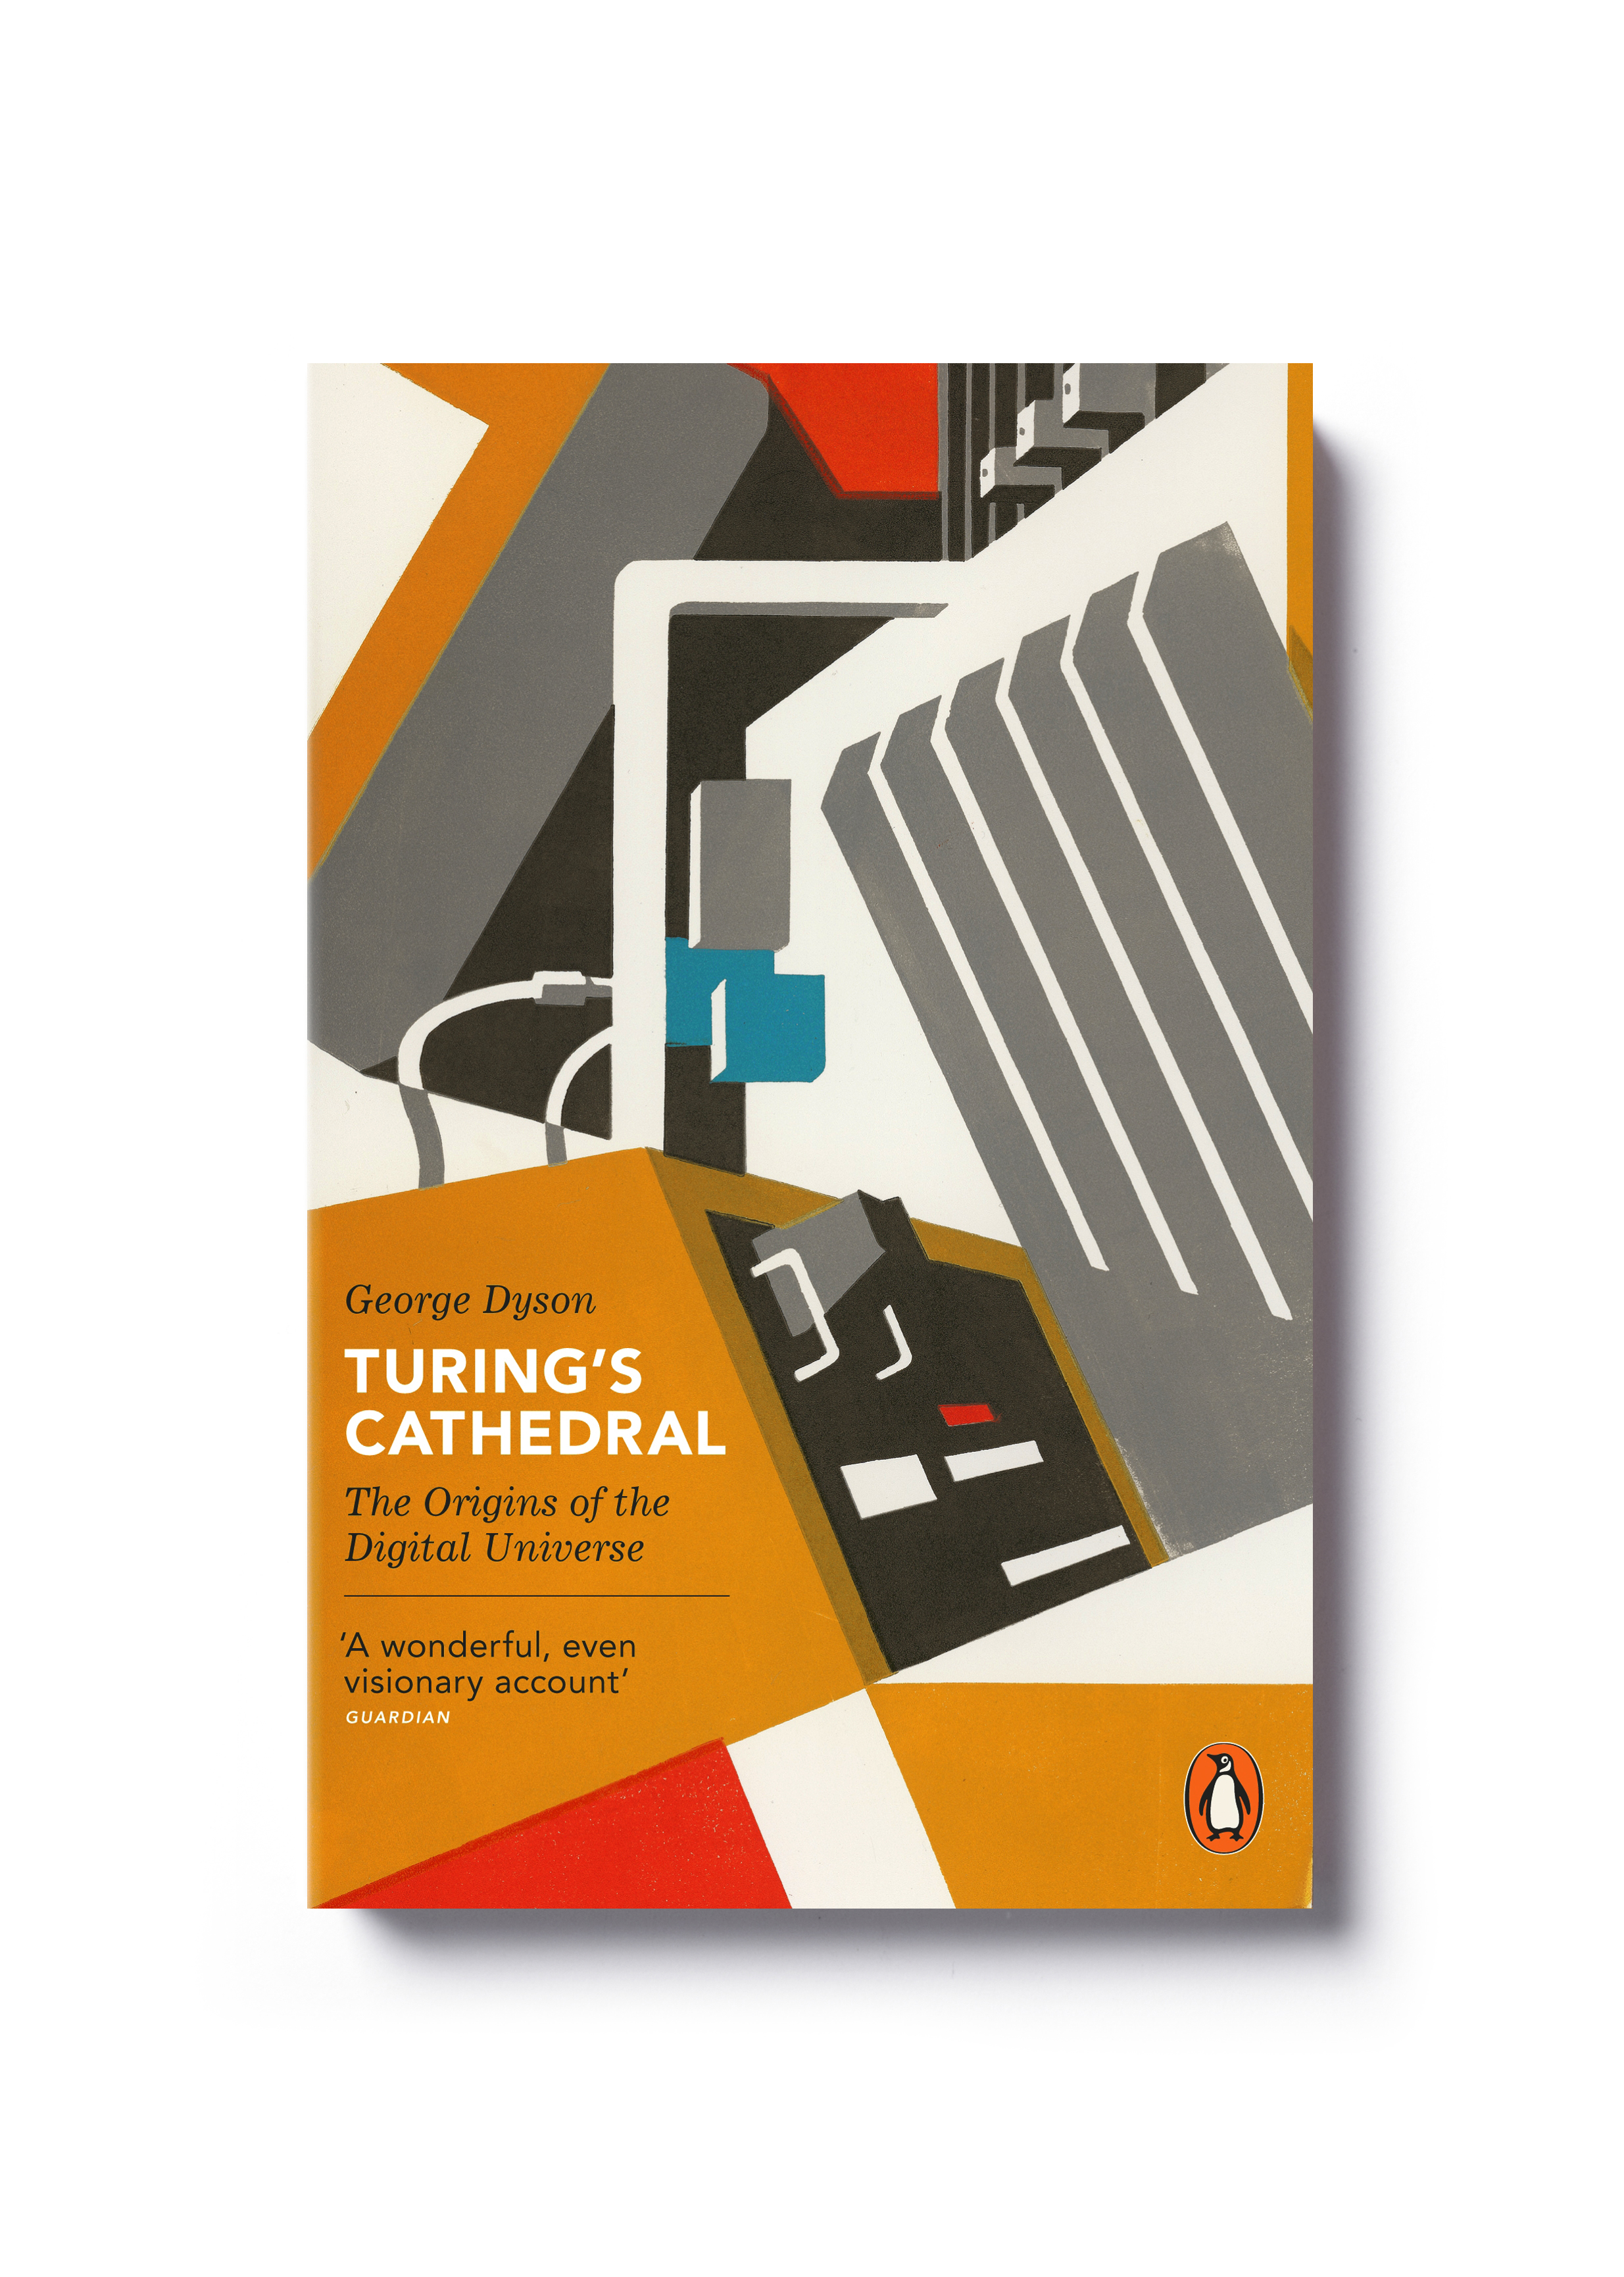  Turing's Cathedral  by George Dyson - Art Direction: Jim Stoddart Art: Paul Catherall Design: Matthew Young  &nbsp; 